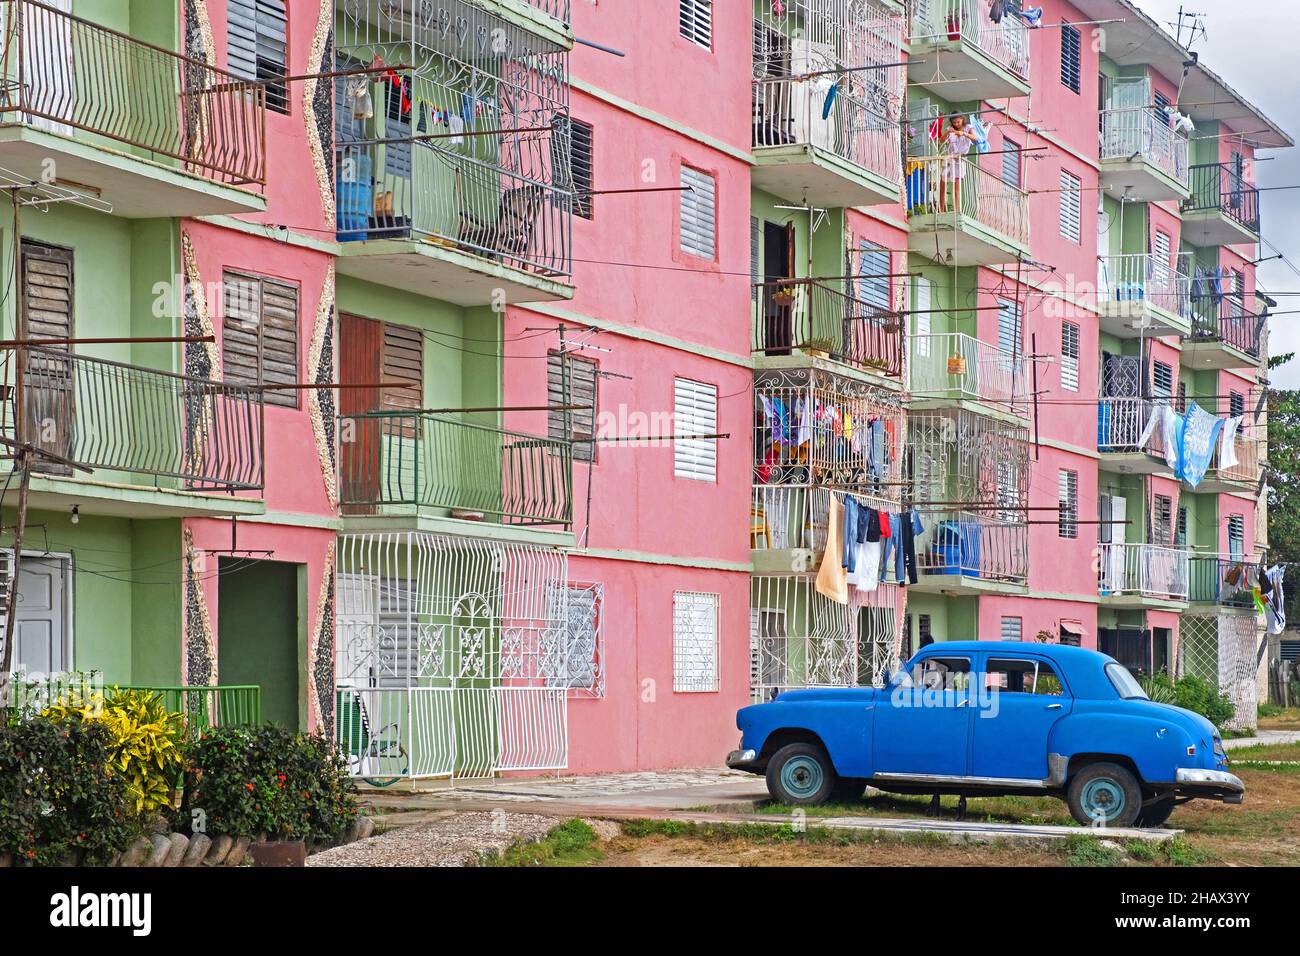 Soviet style apartments / flats in pastel colours and classic 1950s American Plymouth car in the city Florida, Camagüey on the island Cuba, Caribbean Stock Photo